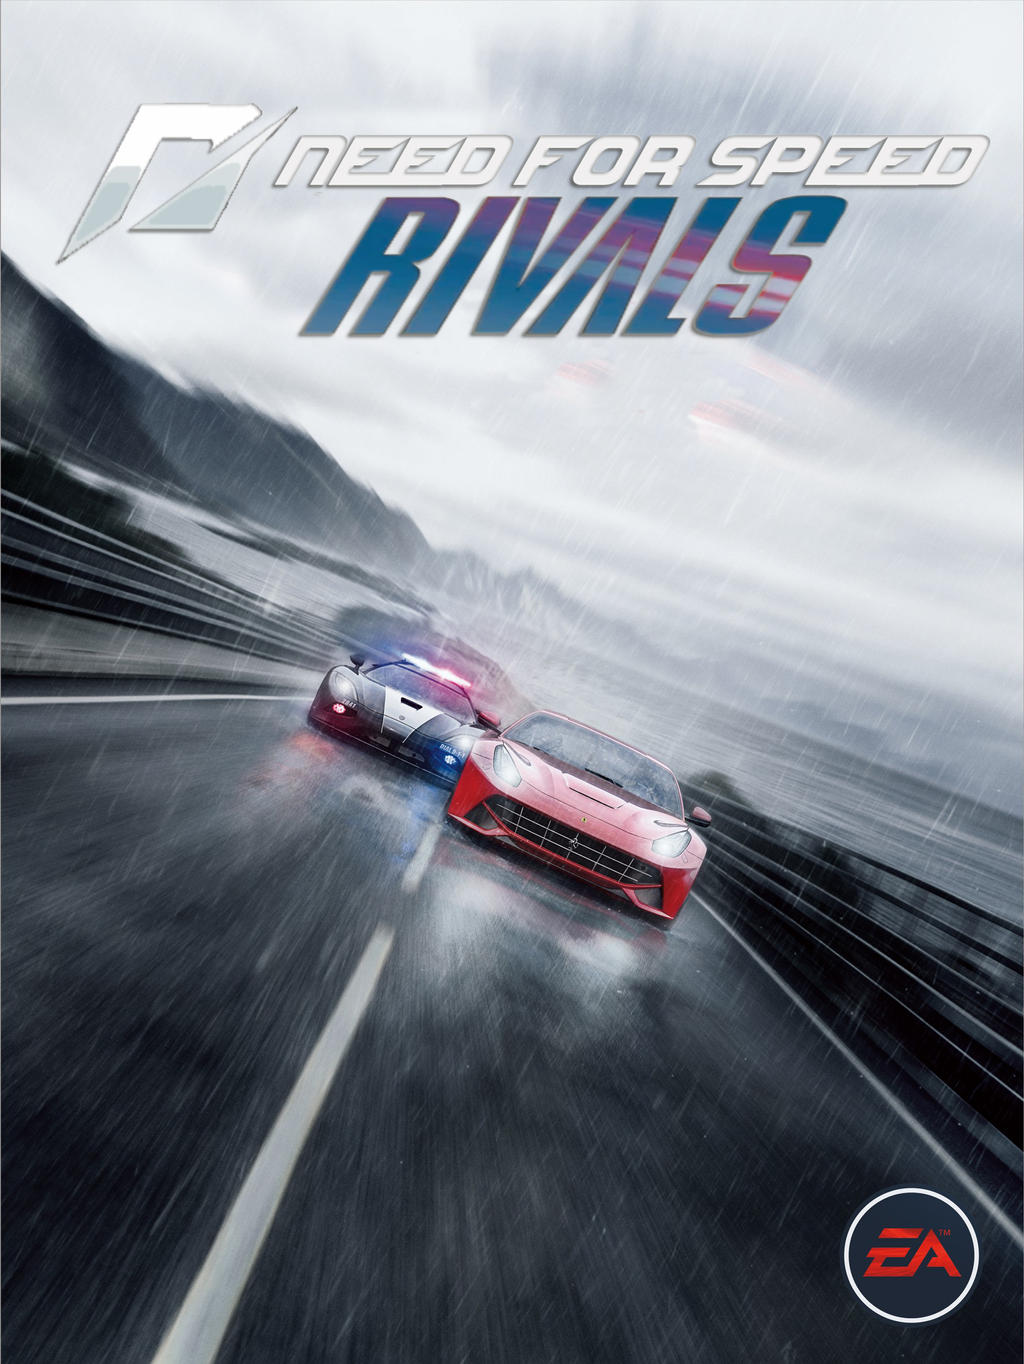 need_for_speed_rivals_reimaginated_by_mighoet-d66ymqk.jpg